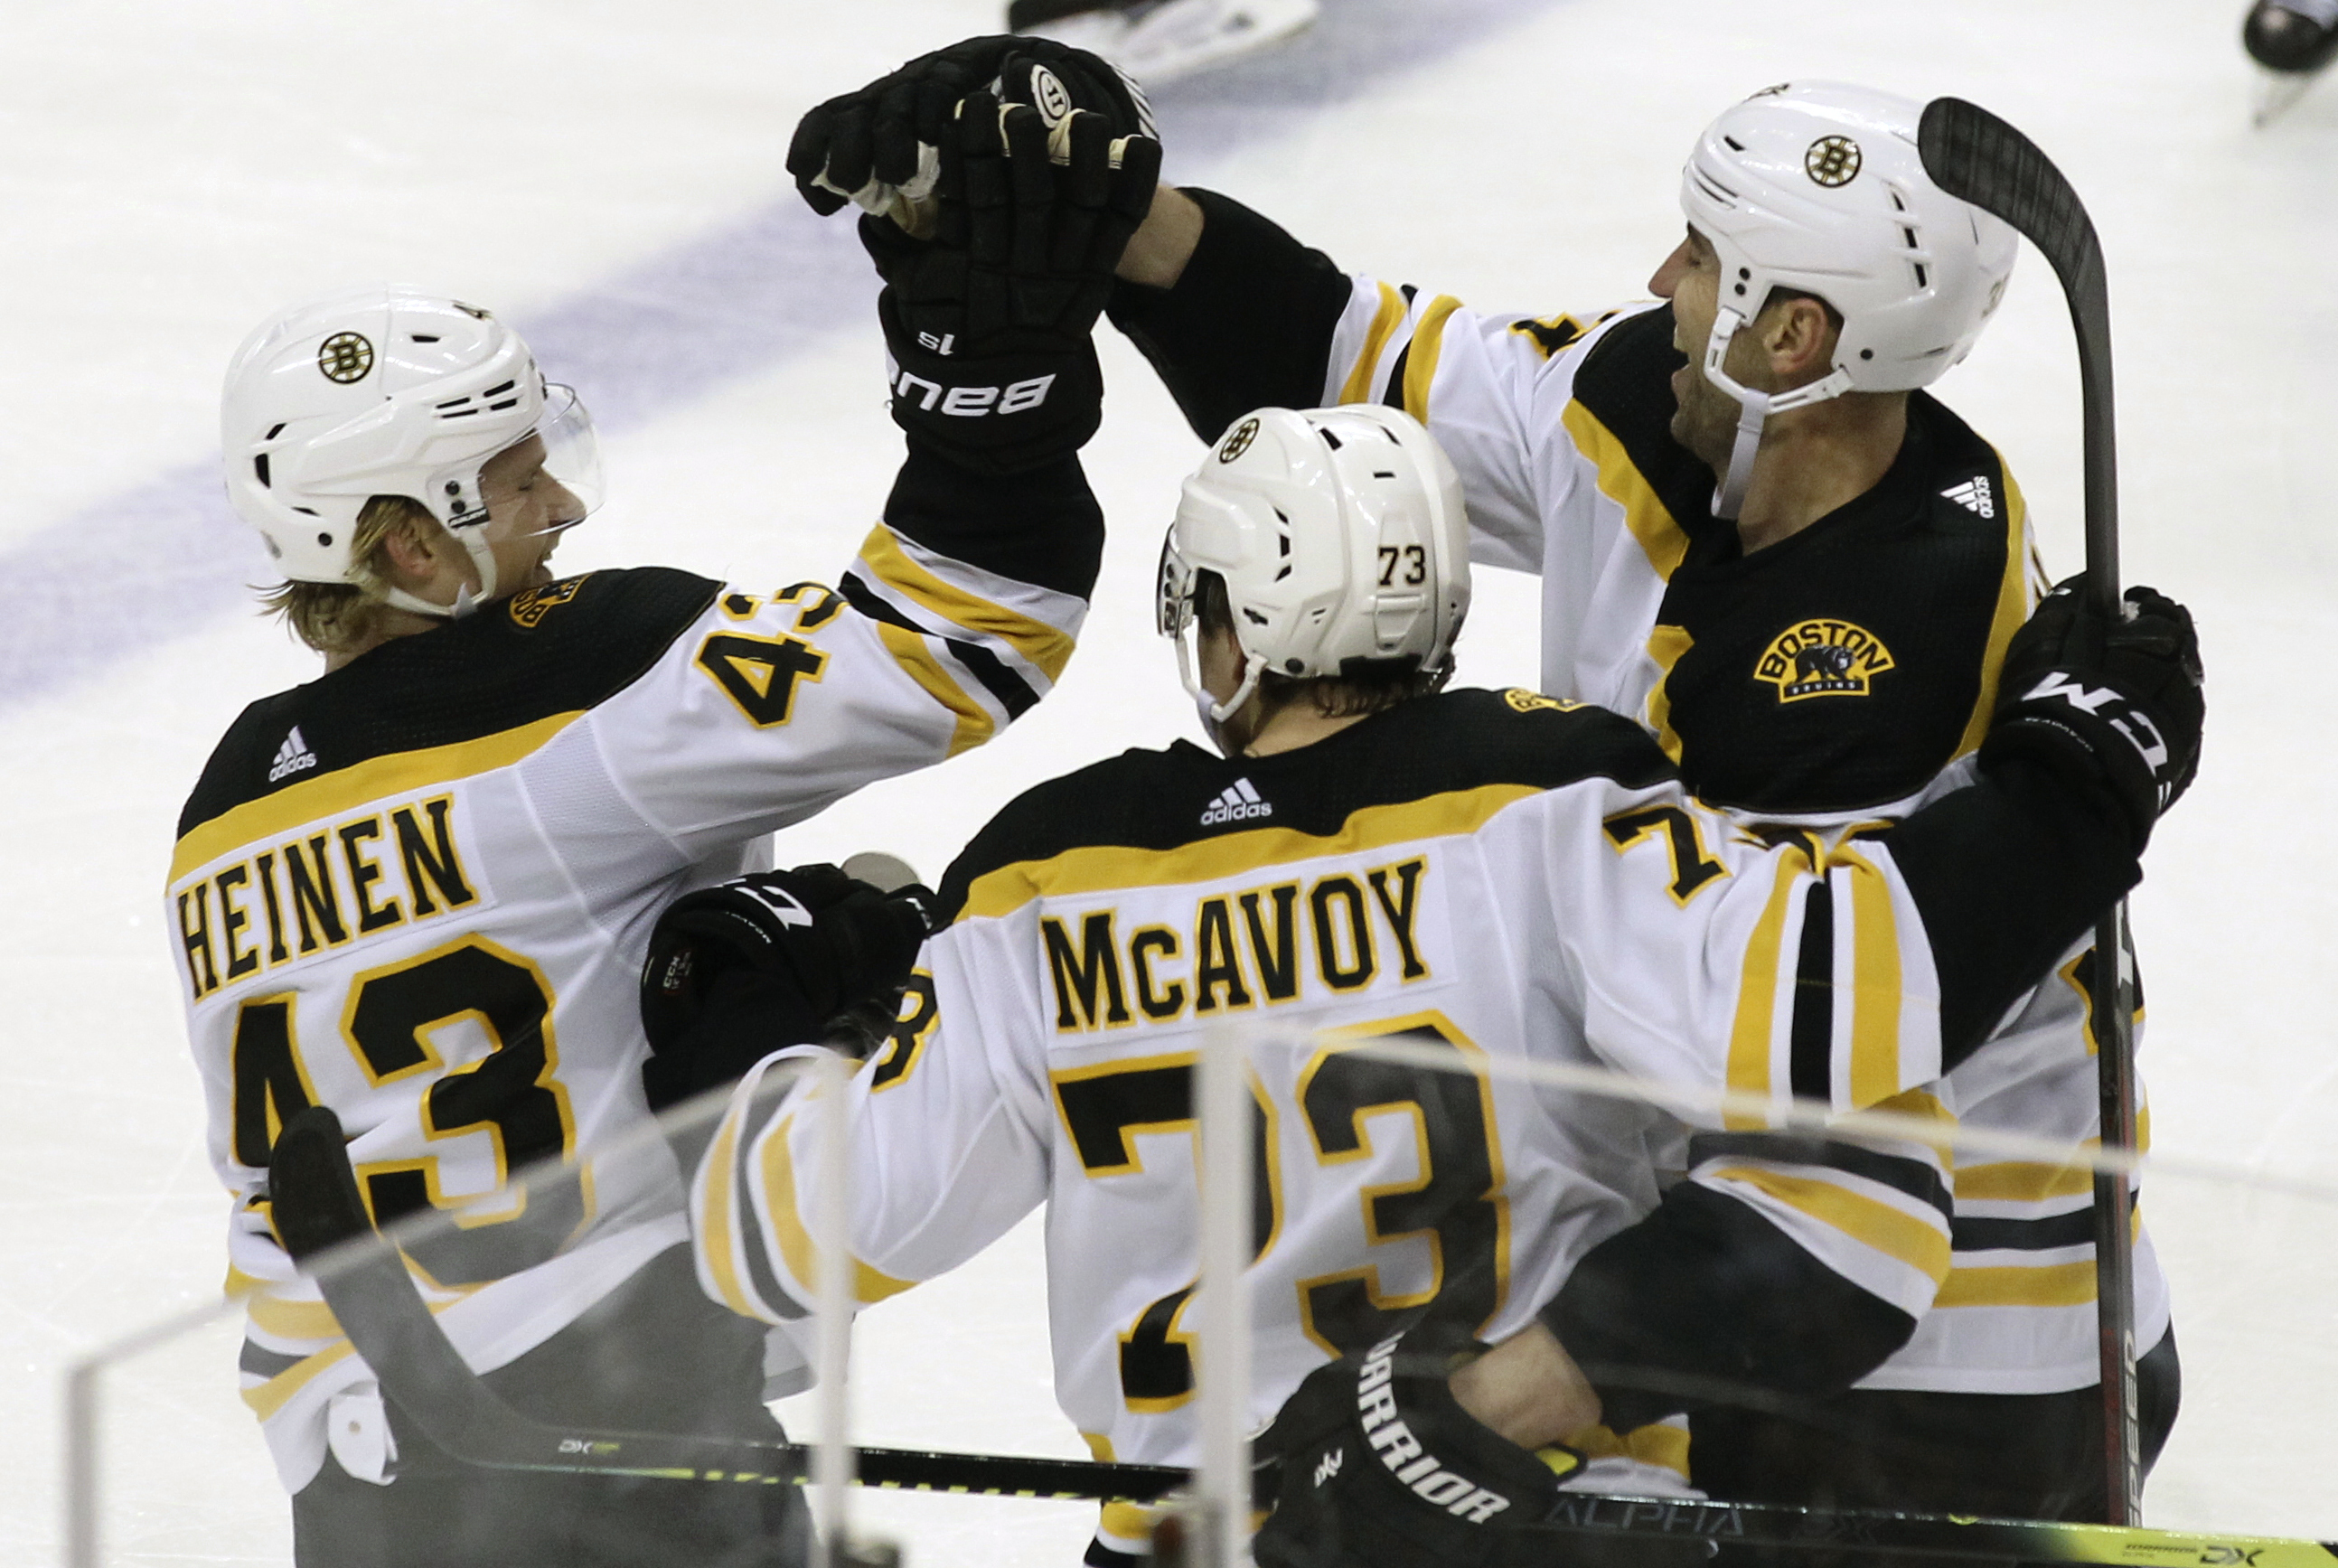 Bruins clinch playoff berth with 7-3 win over Panthers